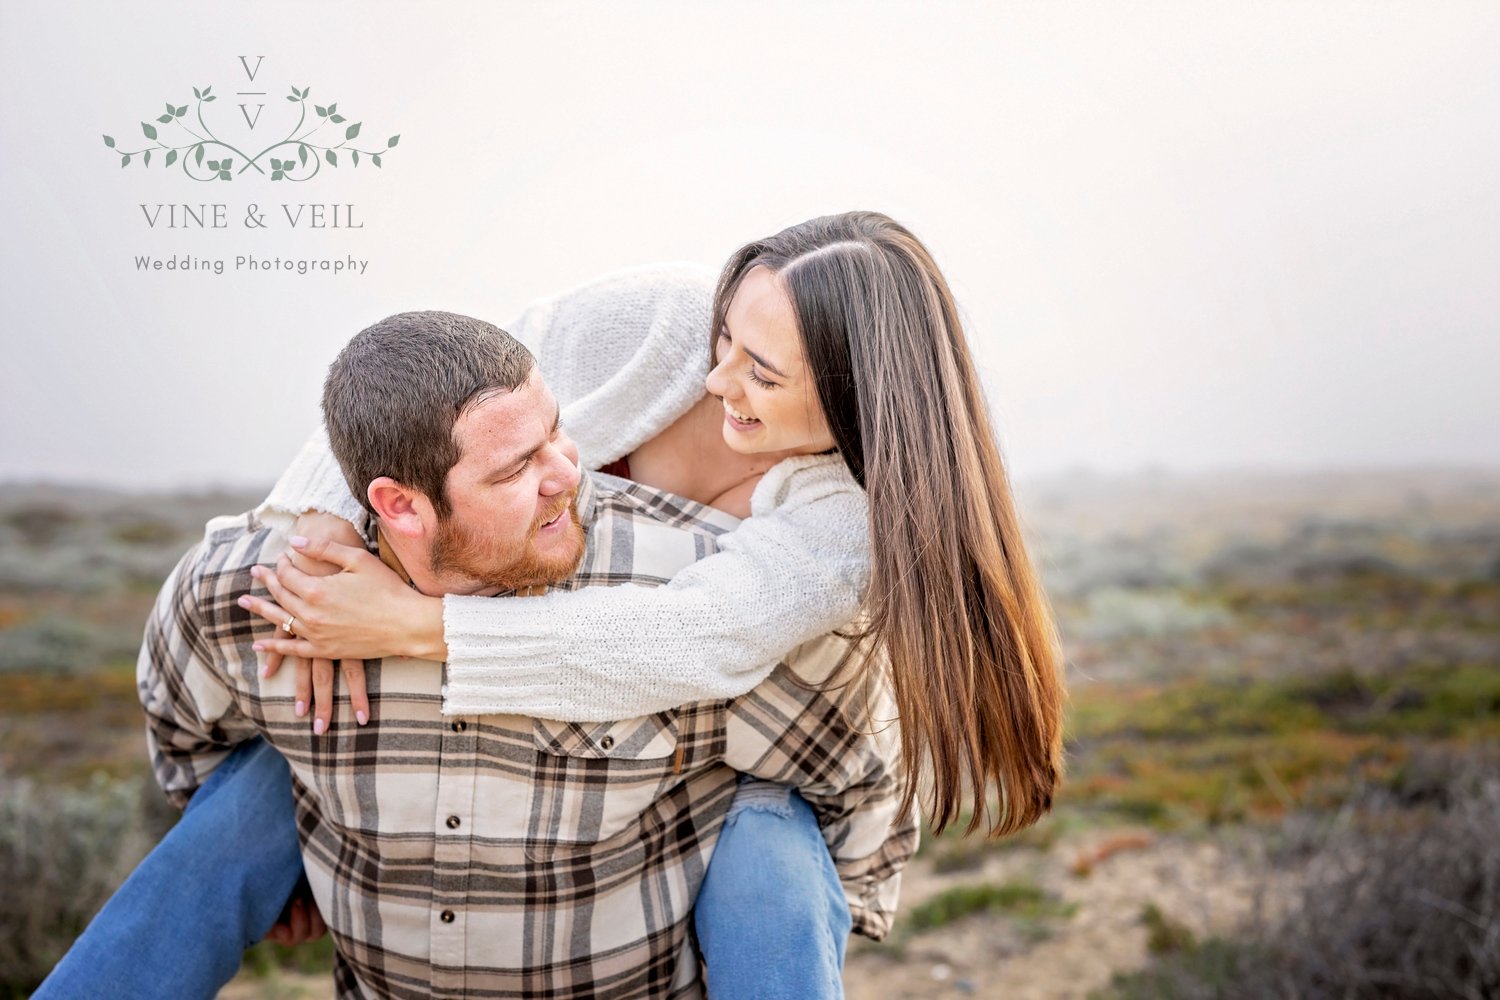 couple giving piggy back rides at the beach during an engagement photoshoot